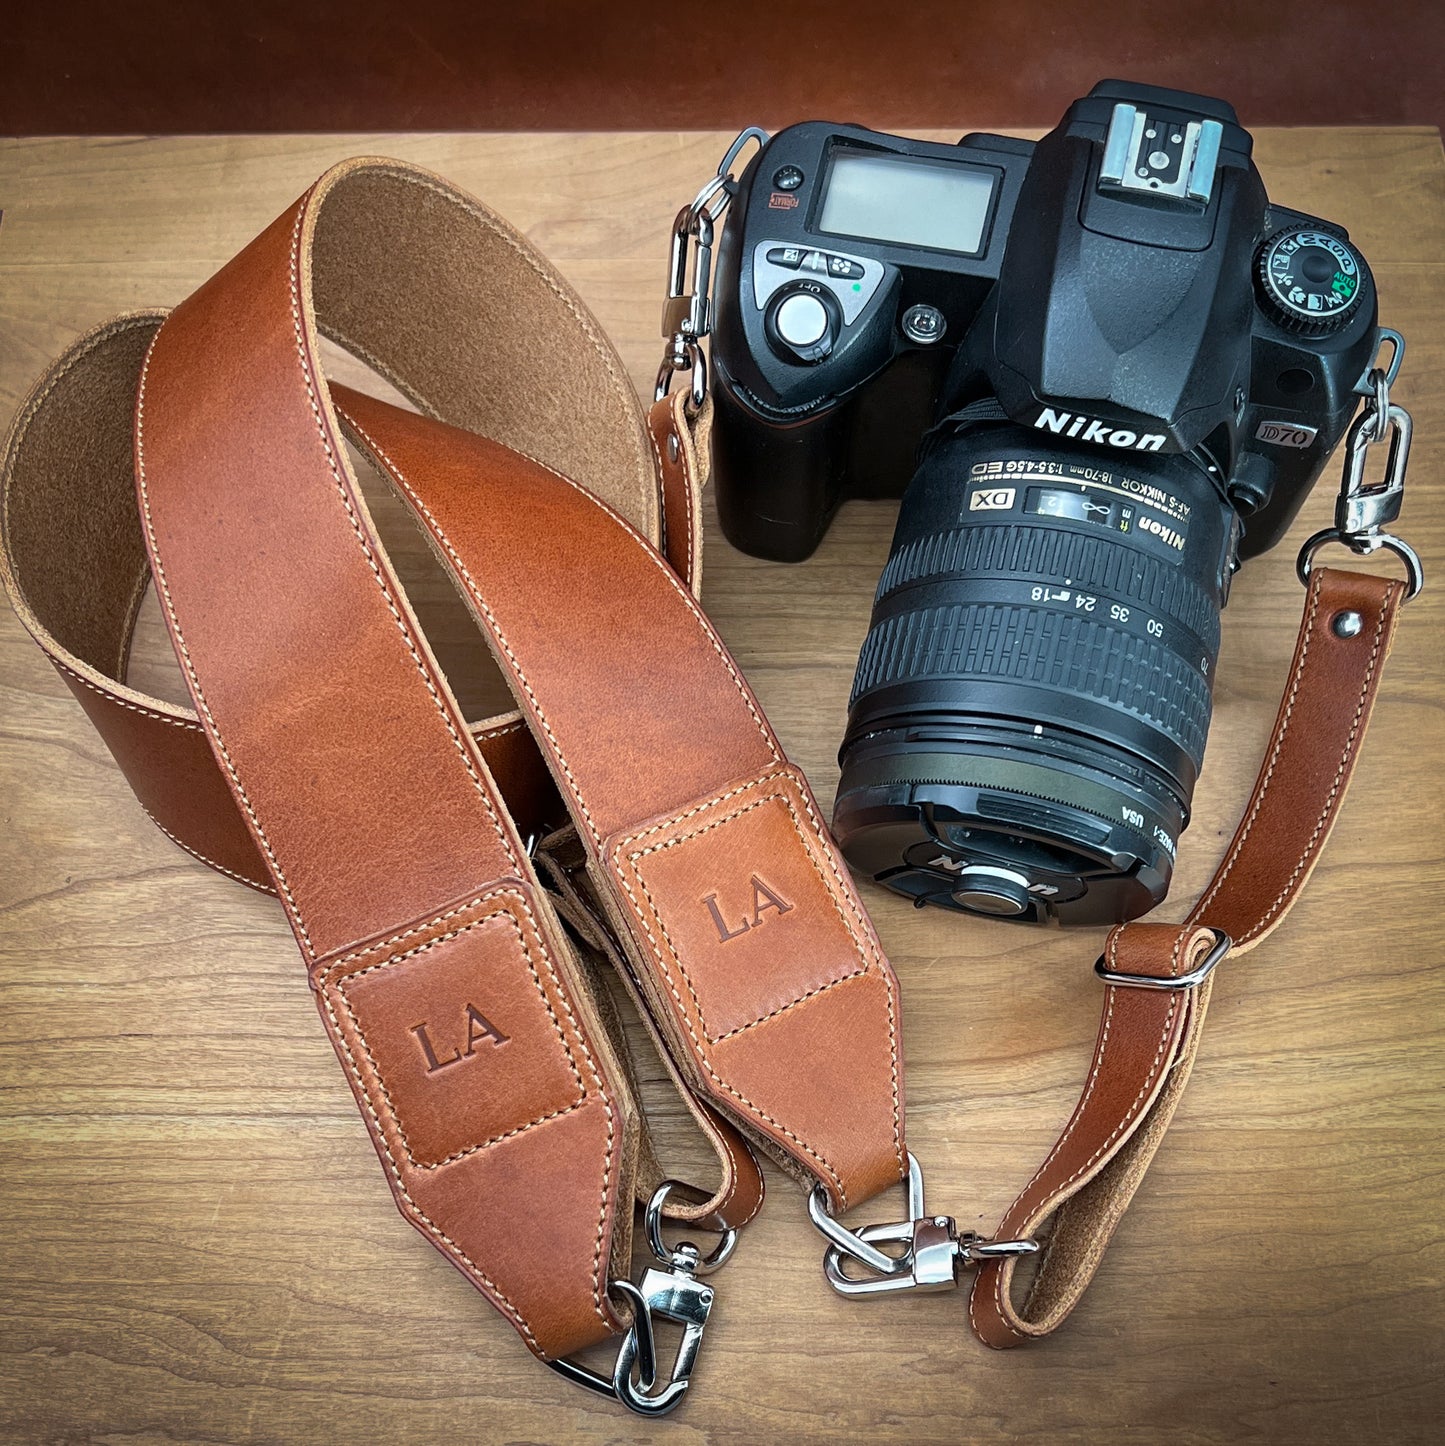 Horween Leather Camera Strap - Handmade to Order